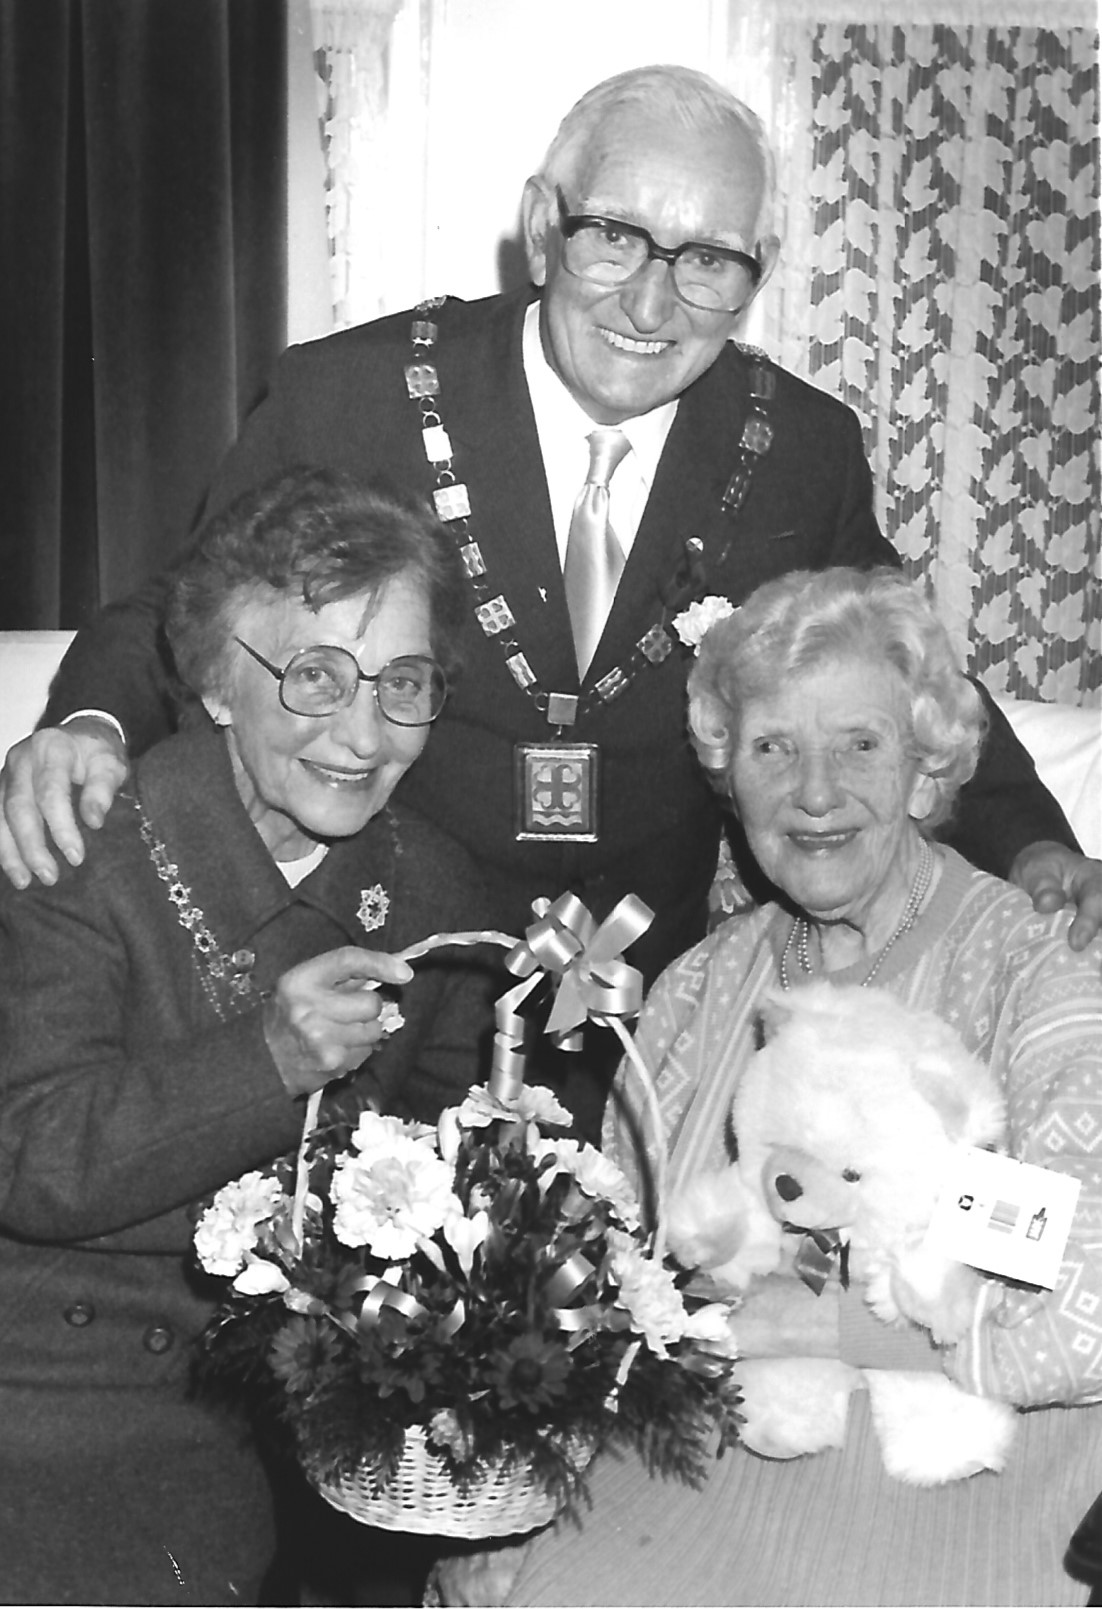 Southport in November 1994. Mrs Edith Alice Barr celebrates her 100th birthday with a special Mayoral visit